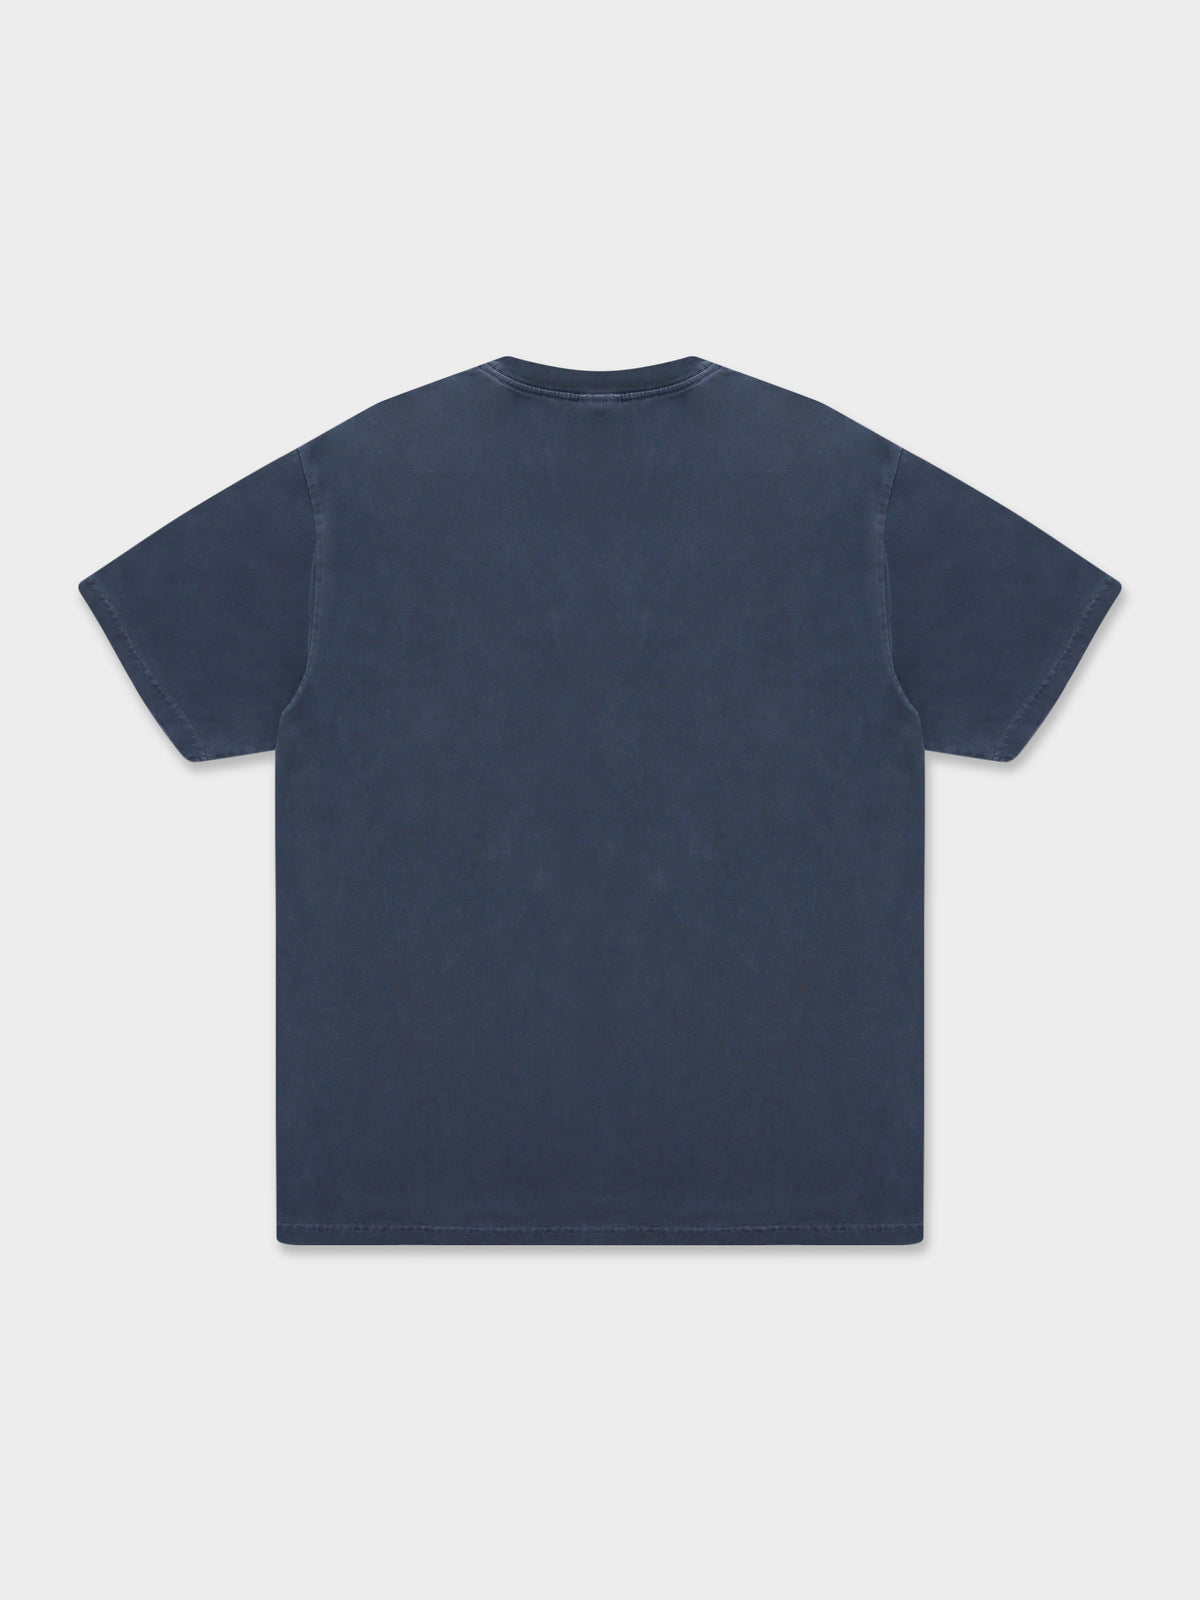 Gramicci One Point T-Shirt in Navy Pigment | Navy